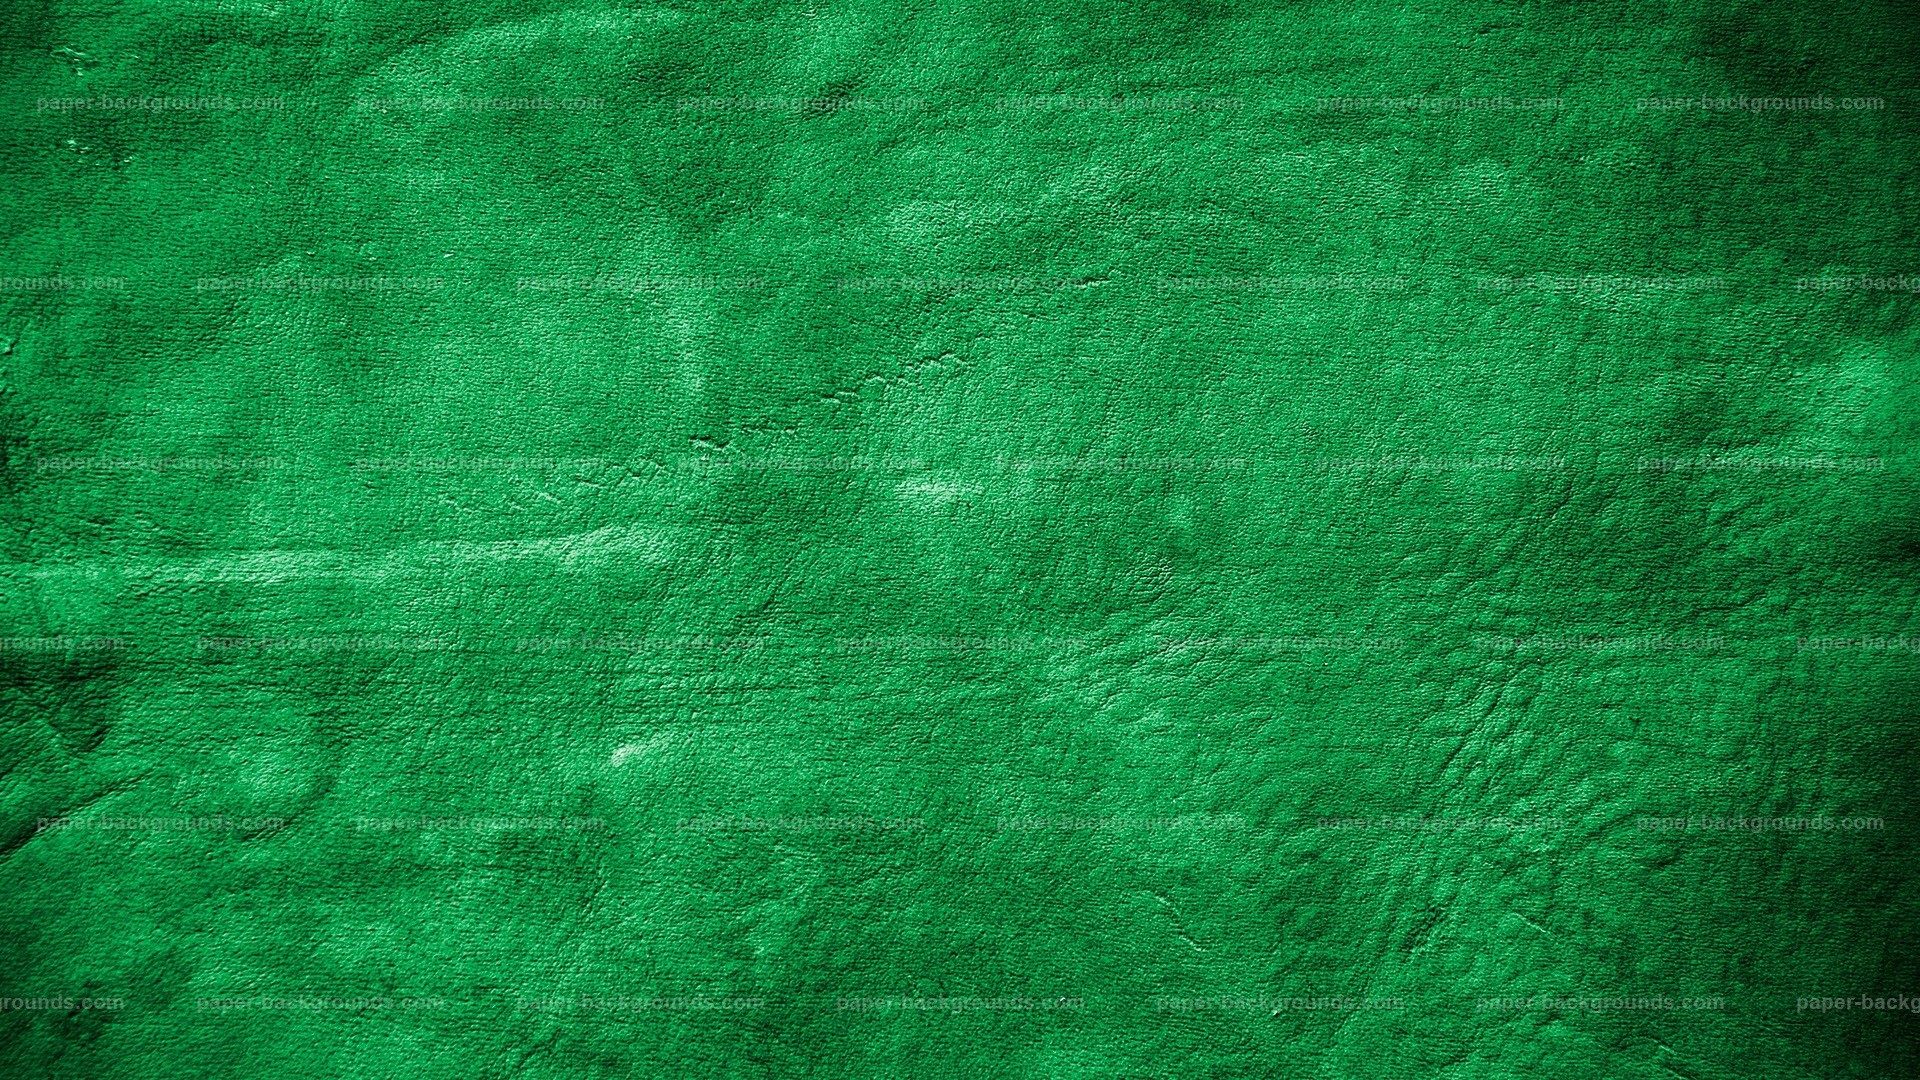 Wallpaper HD Emerald Green With Resolution 1920X1080 pixel. You can make this wallpaper for your Desktop Computer Backgrounds, Mac Wallpapers, Android Lock screen or iPhone Screensavers